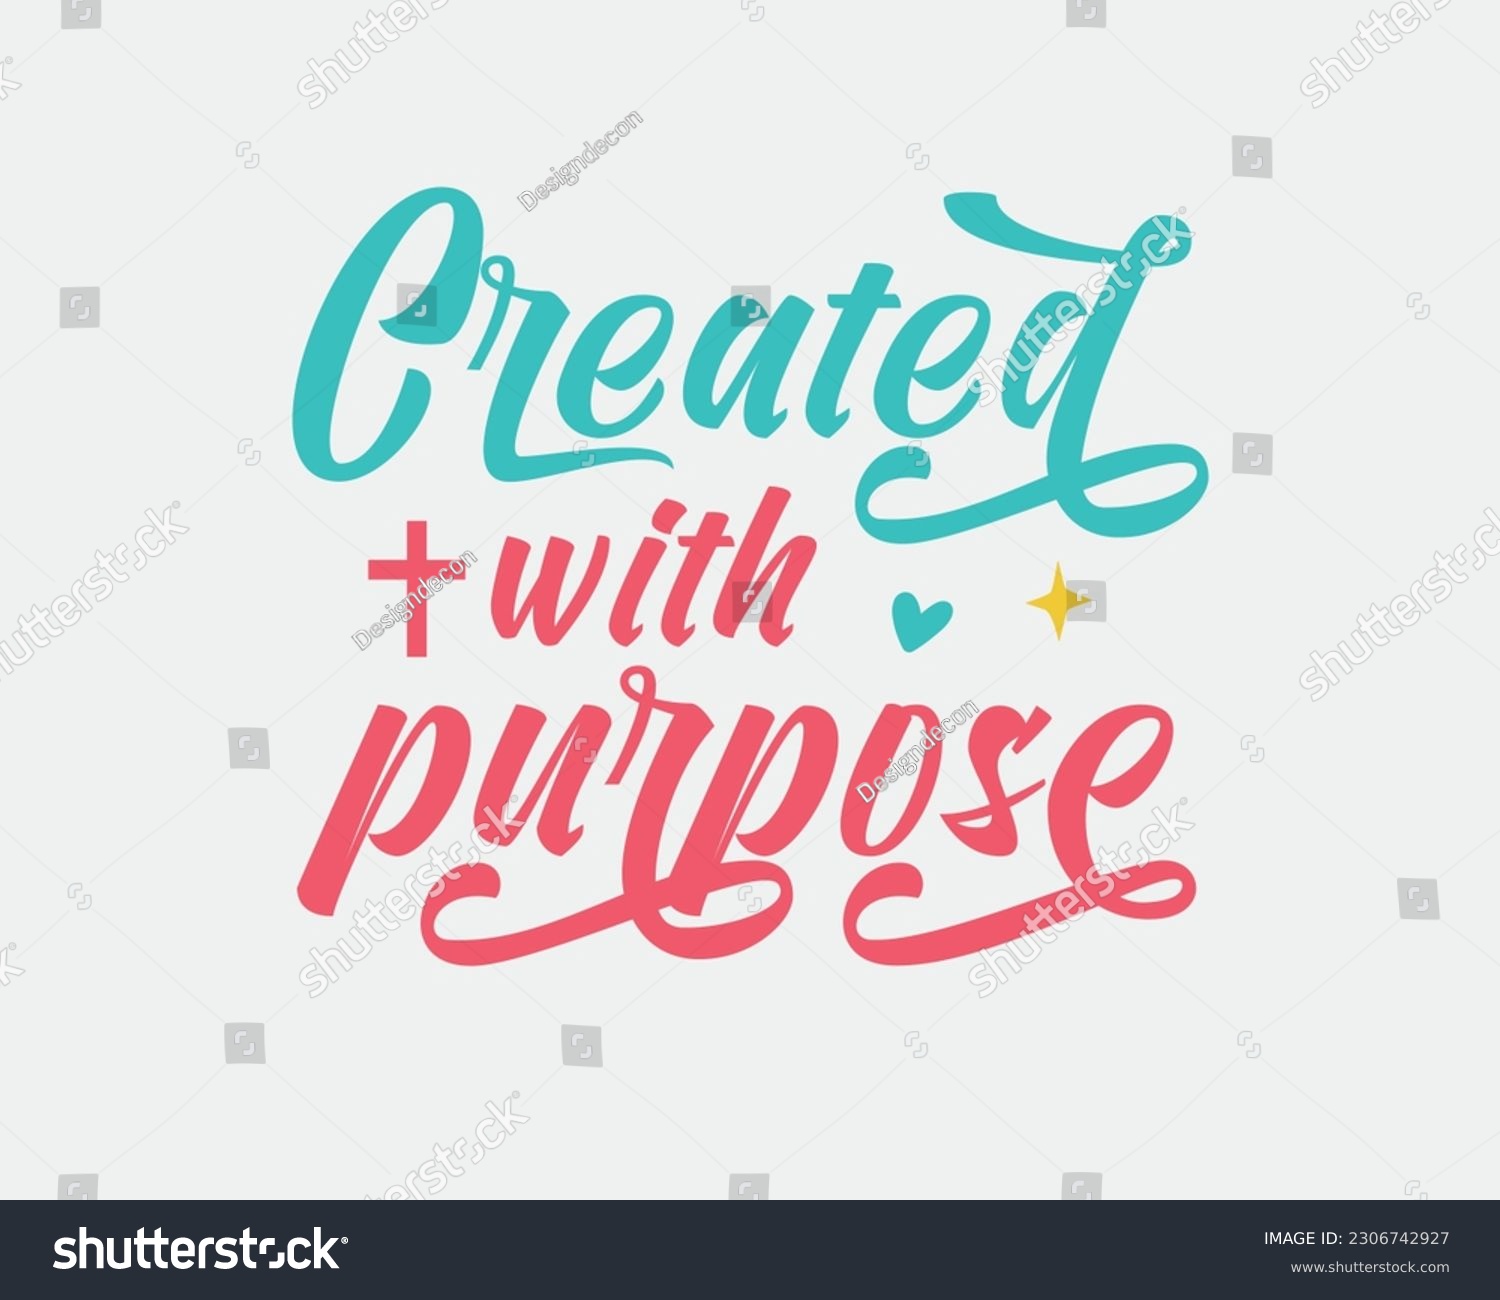 SVG of Created with Purpose Christian Inspirational quote retro script typographic art on white background svg